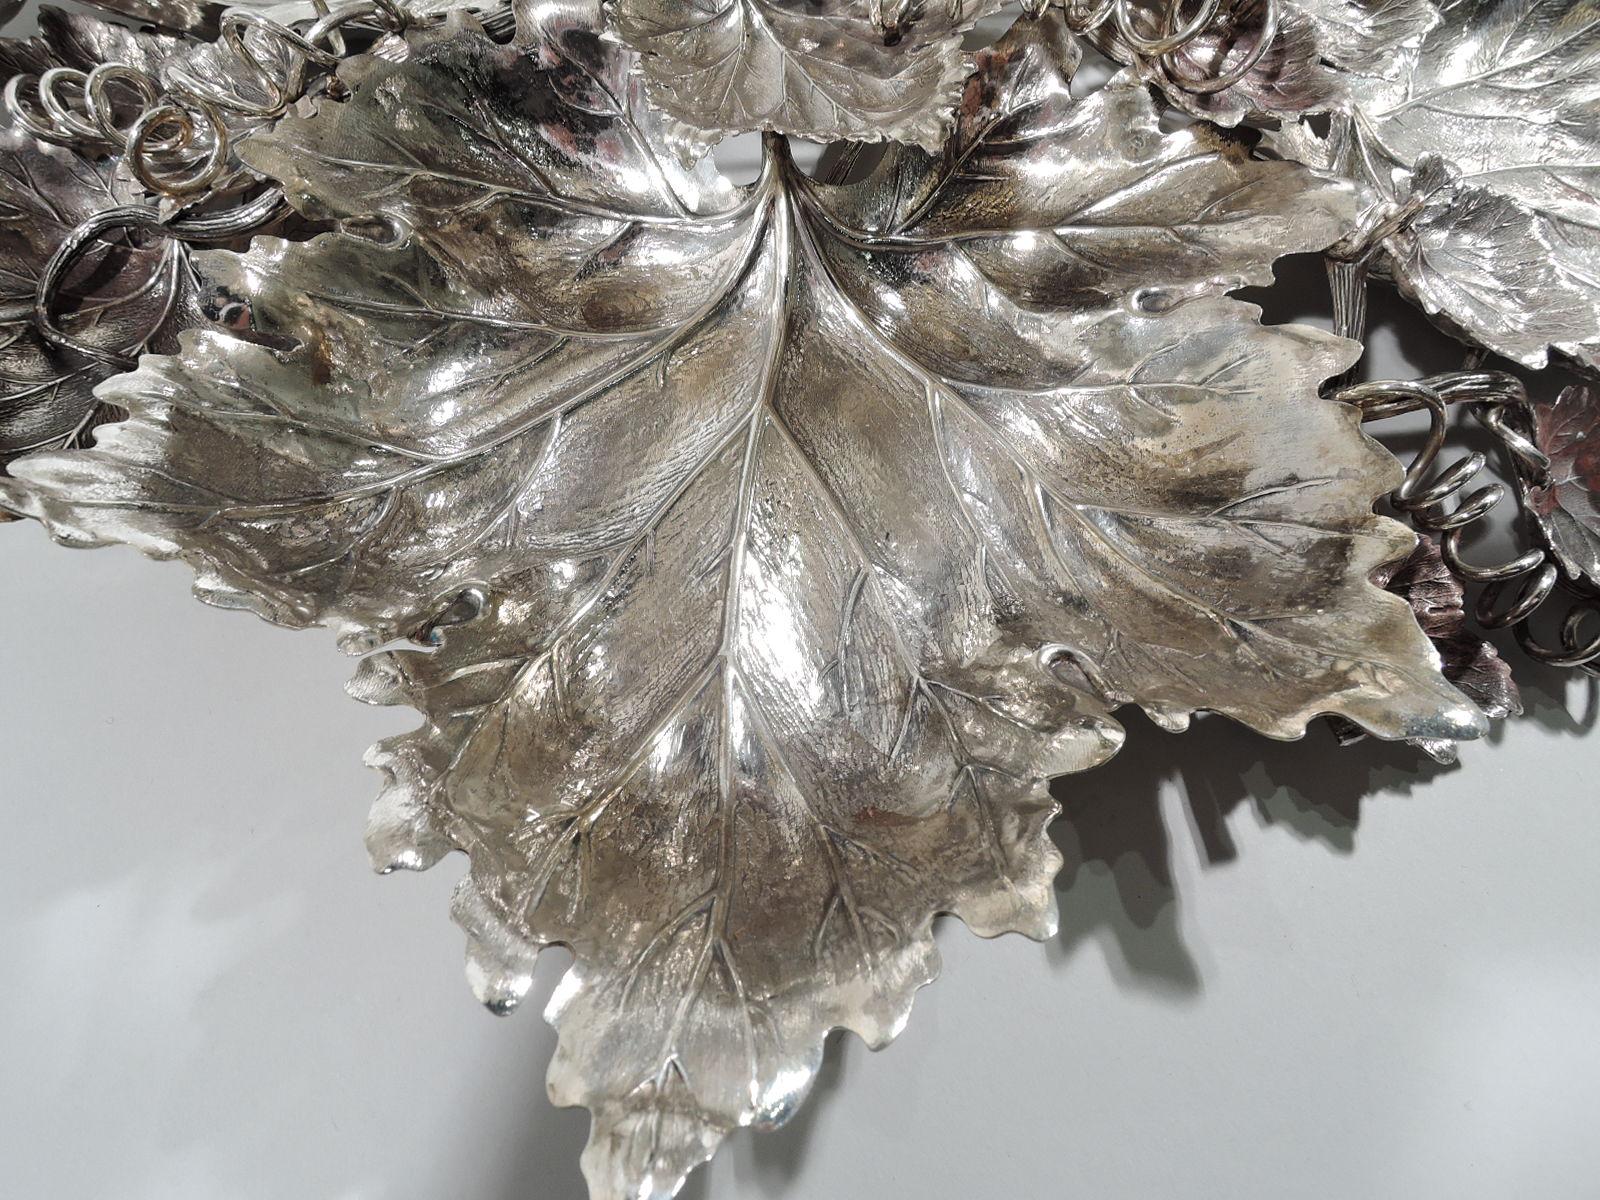 Buccellati Sterling Silver Leaf and Branch 3-Tier Serving Stand 5